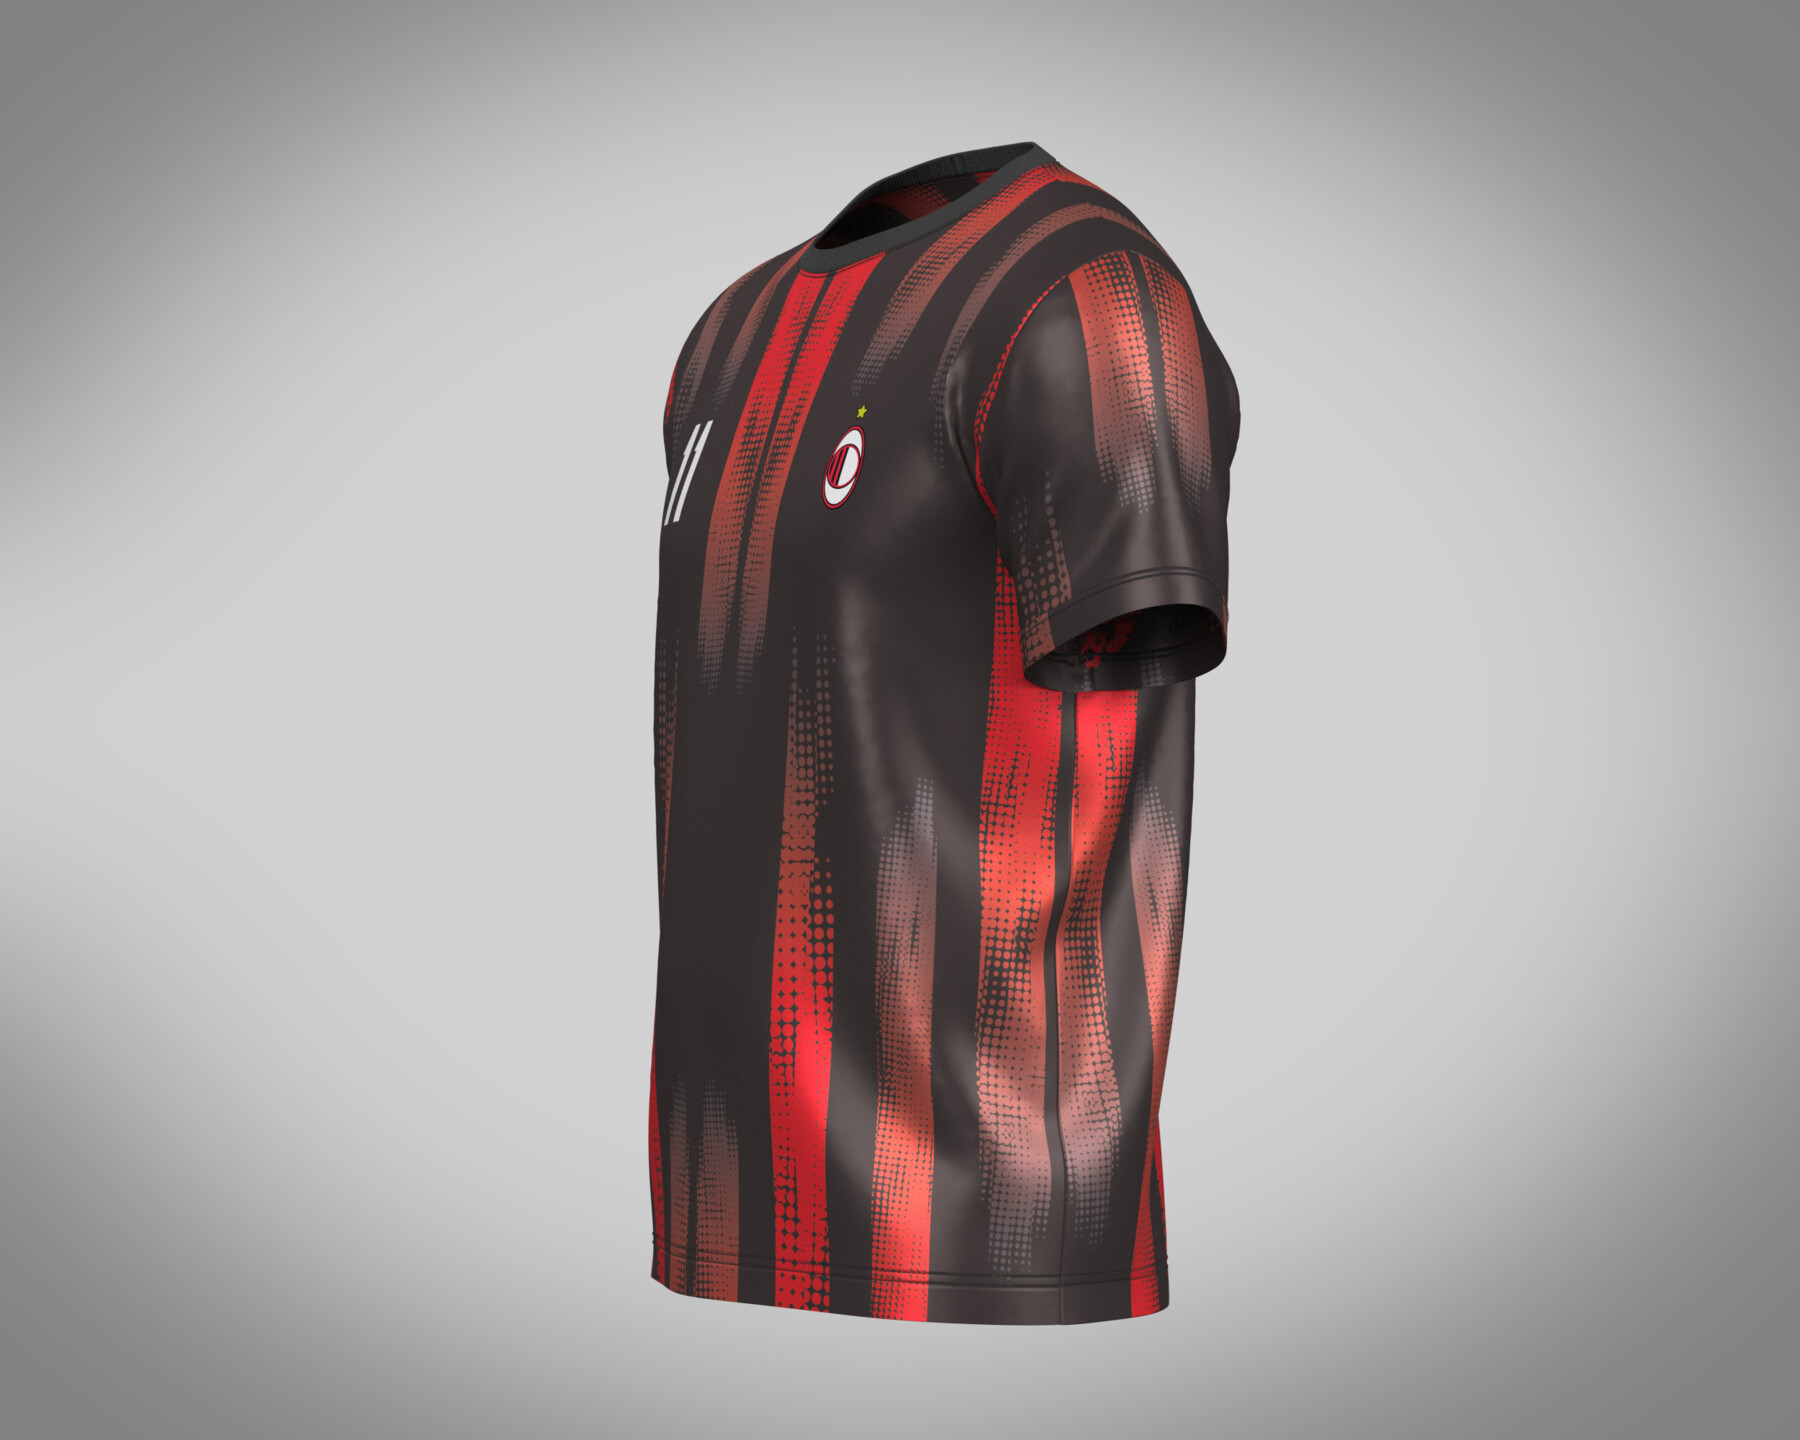 ArtStation - Soccer Football Fire Red color Jersey Player-11